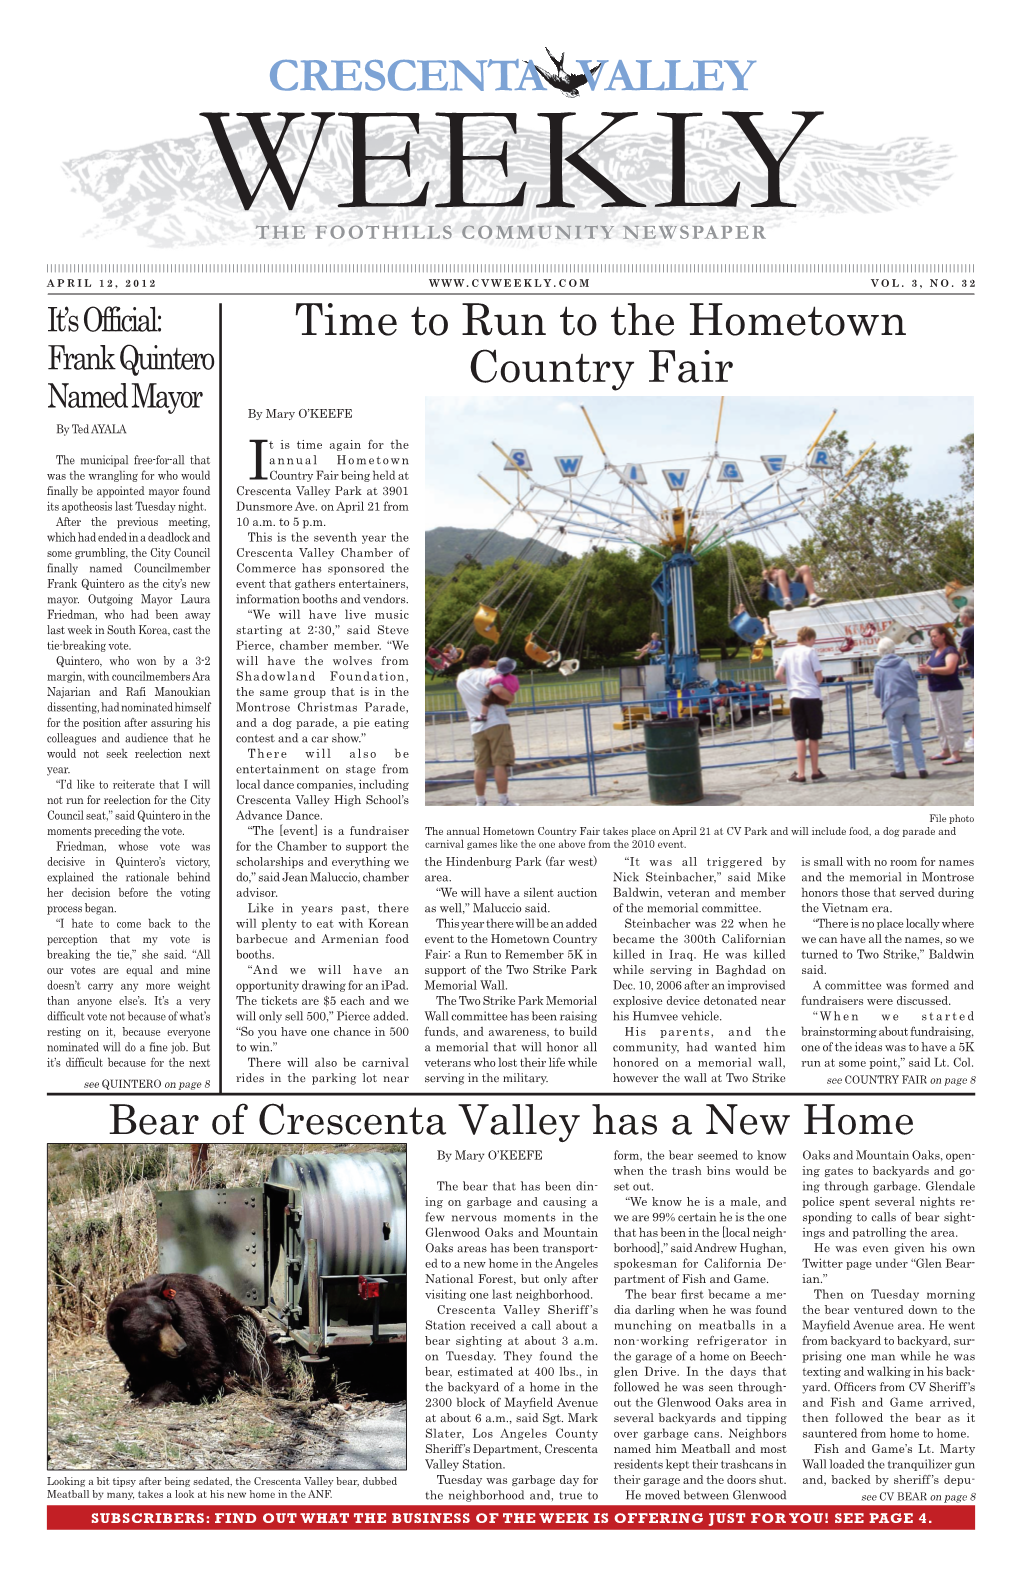 The Foothills Community Newspaper